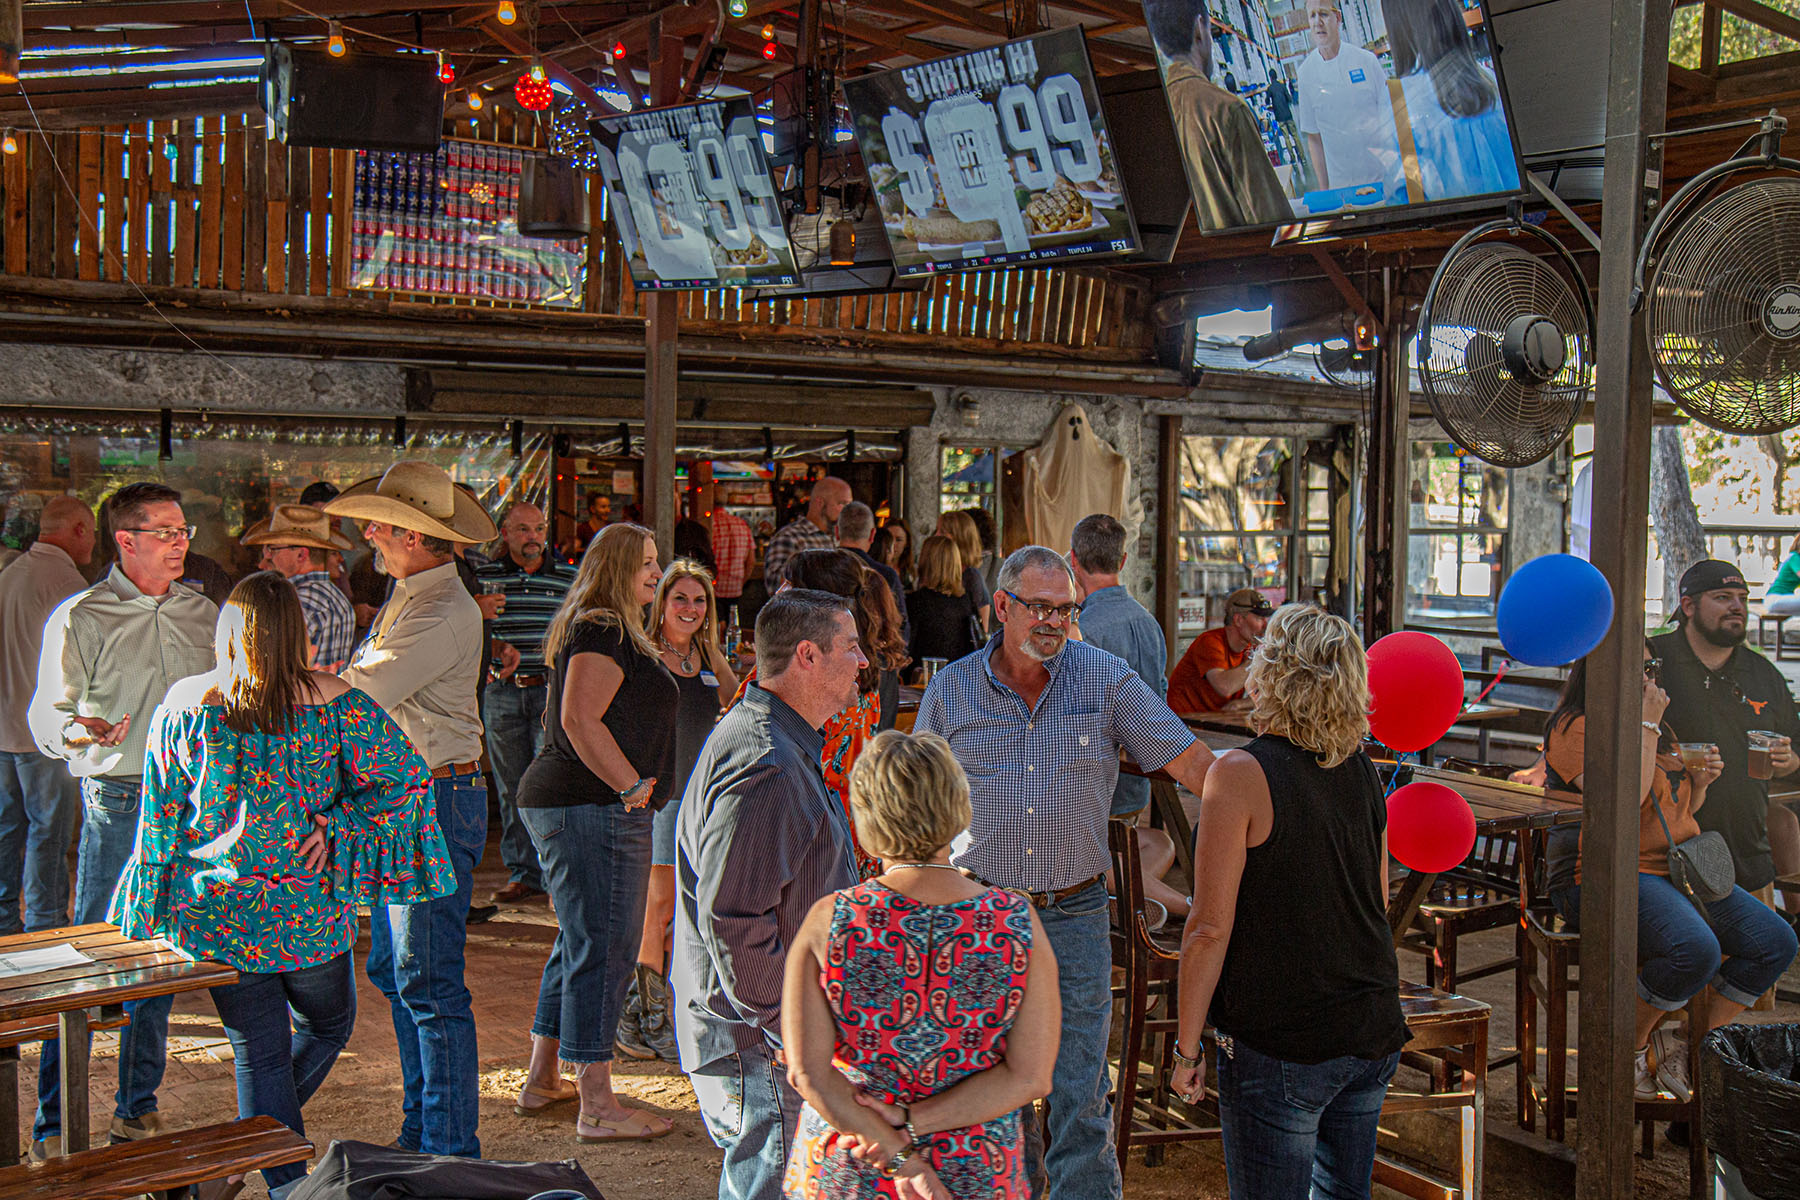 Moontower Saloon - Way South Austin Bar, Beer Garden and Live Music